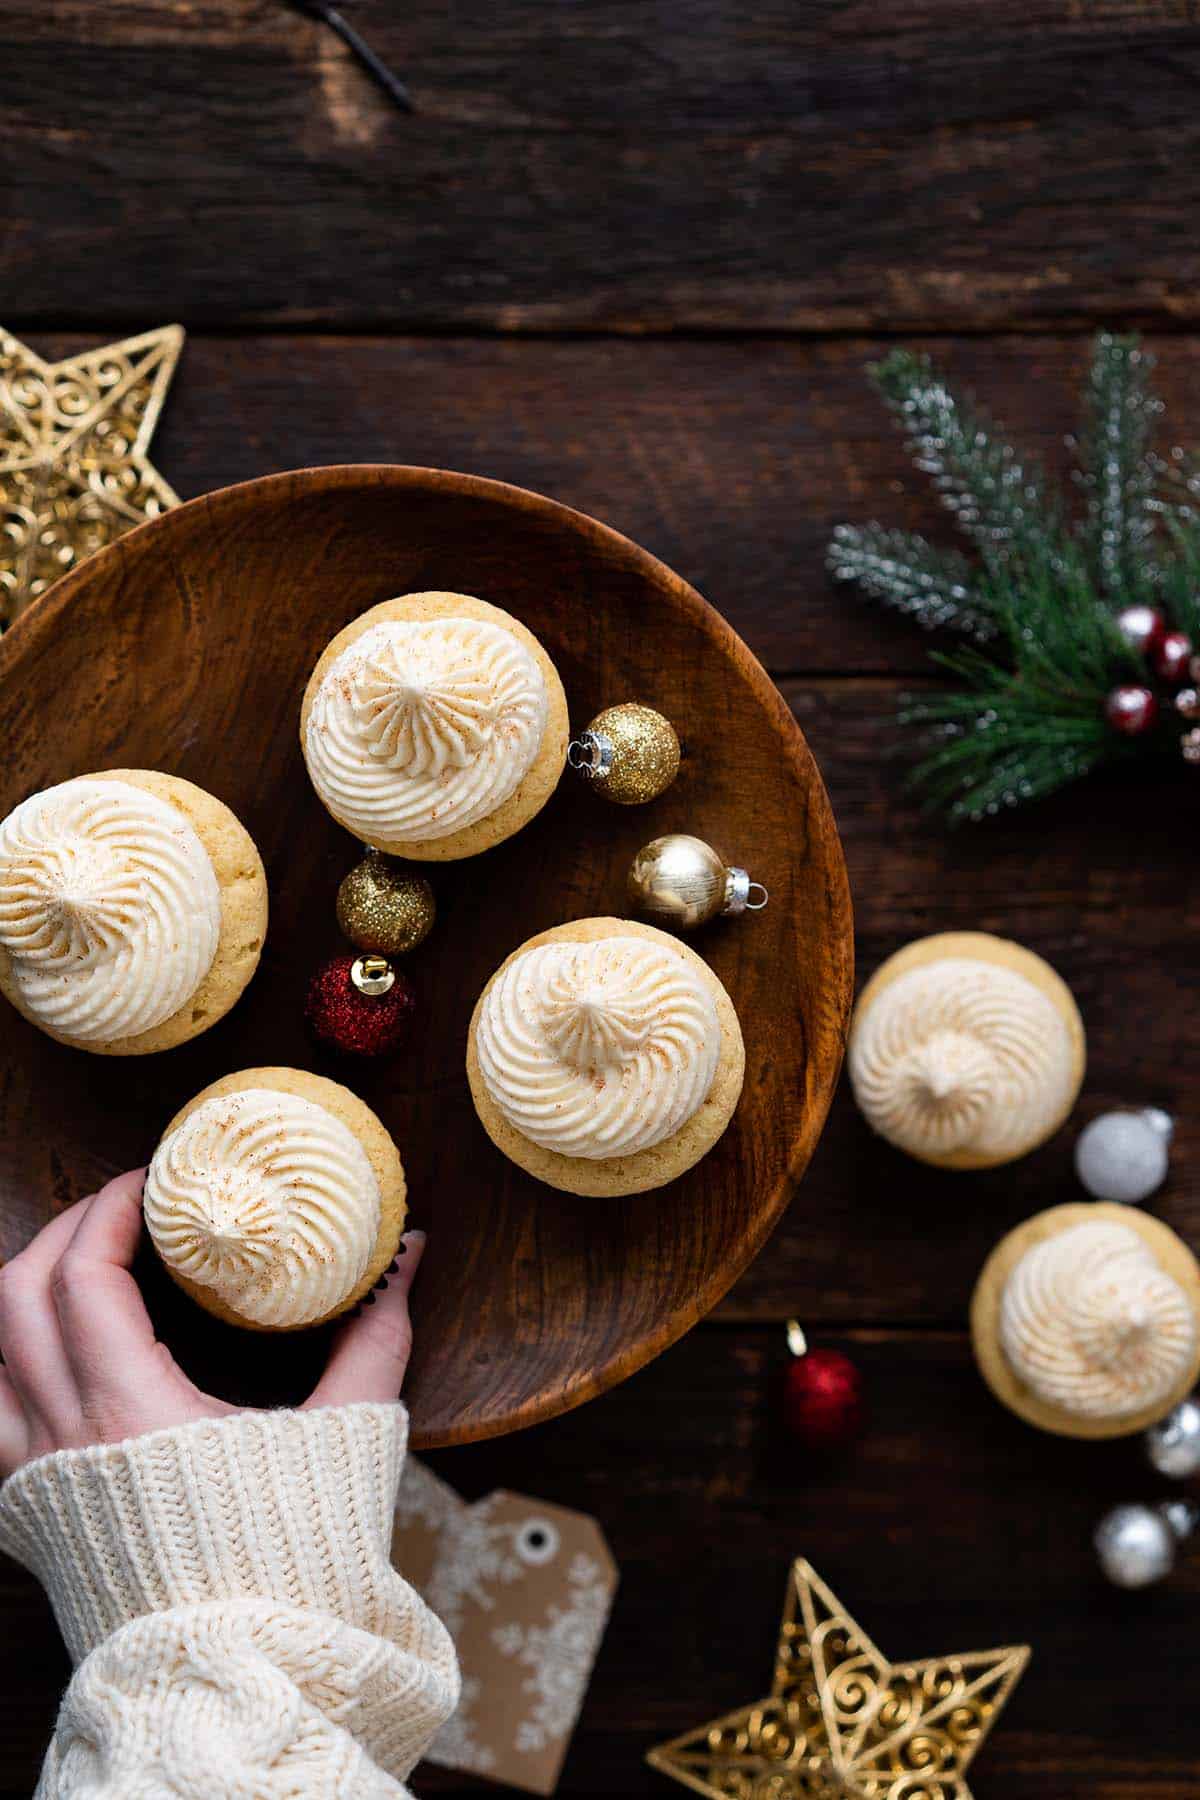 hand reaching in to grab eggnog cupcake off wooden platter